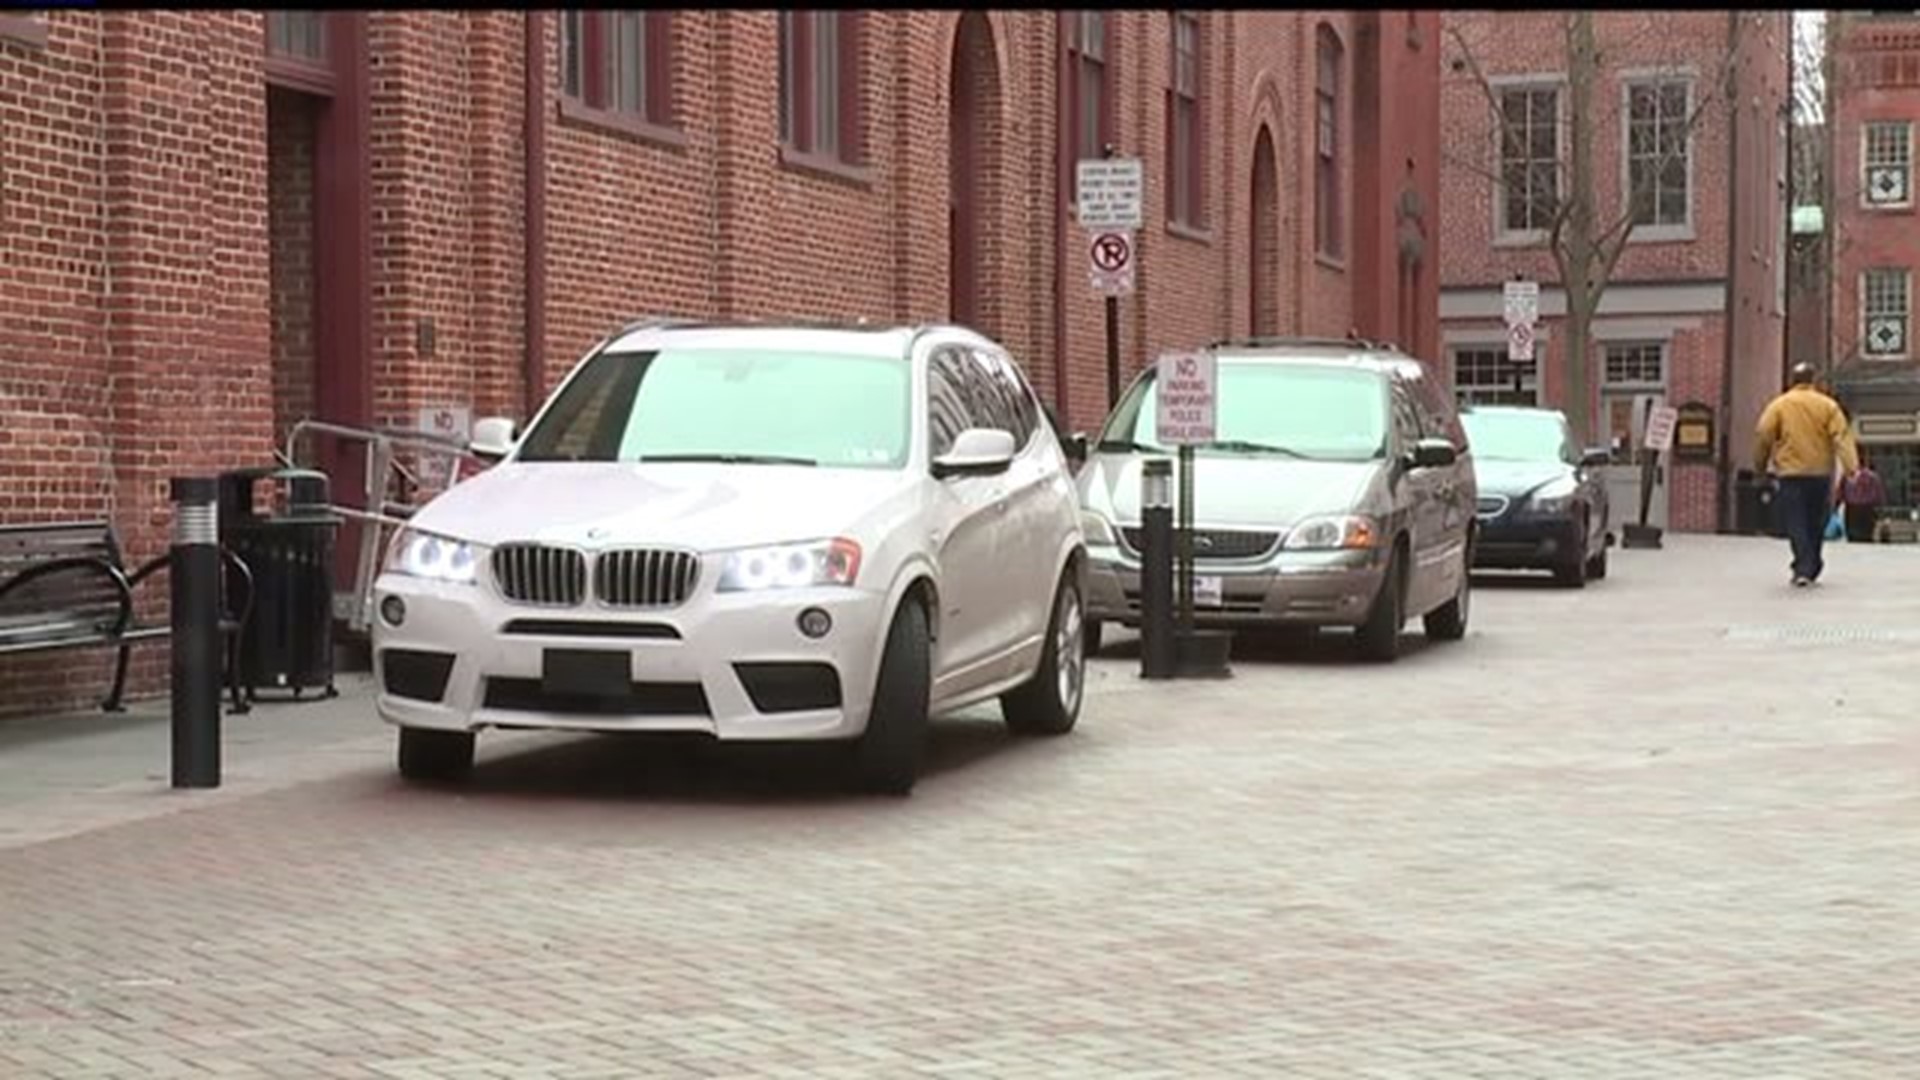 Parking issues in downtown Lancaster